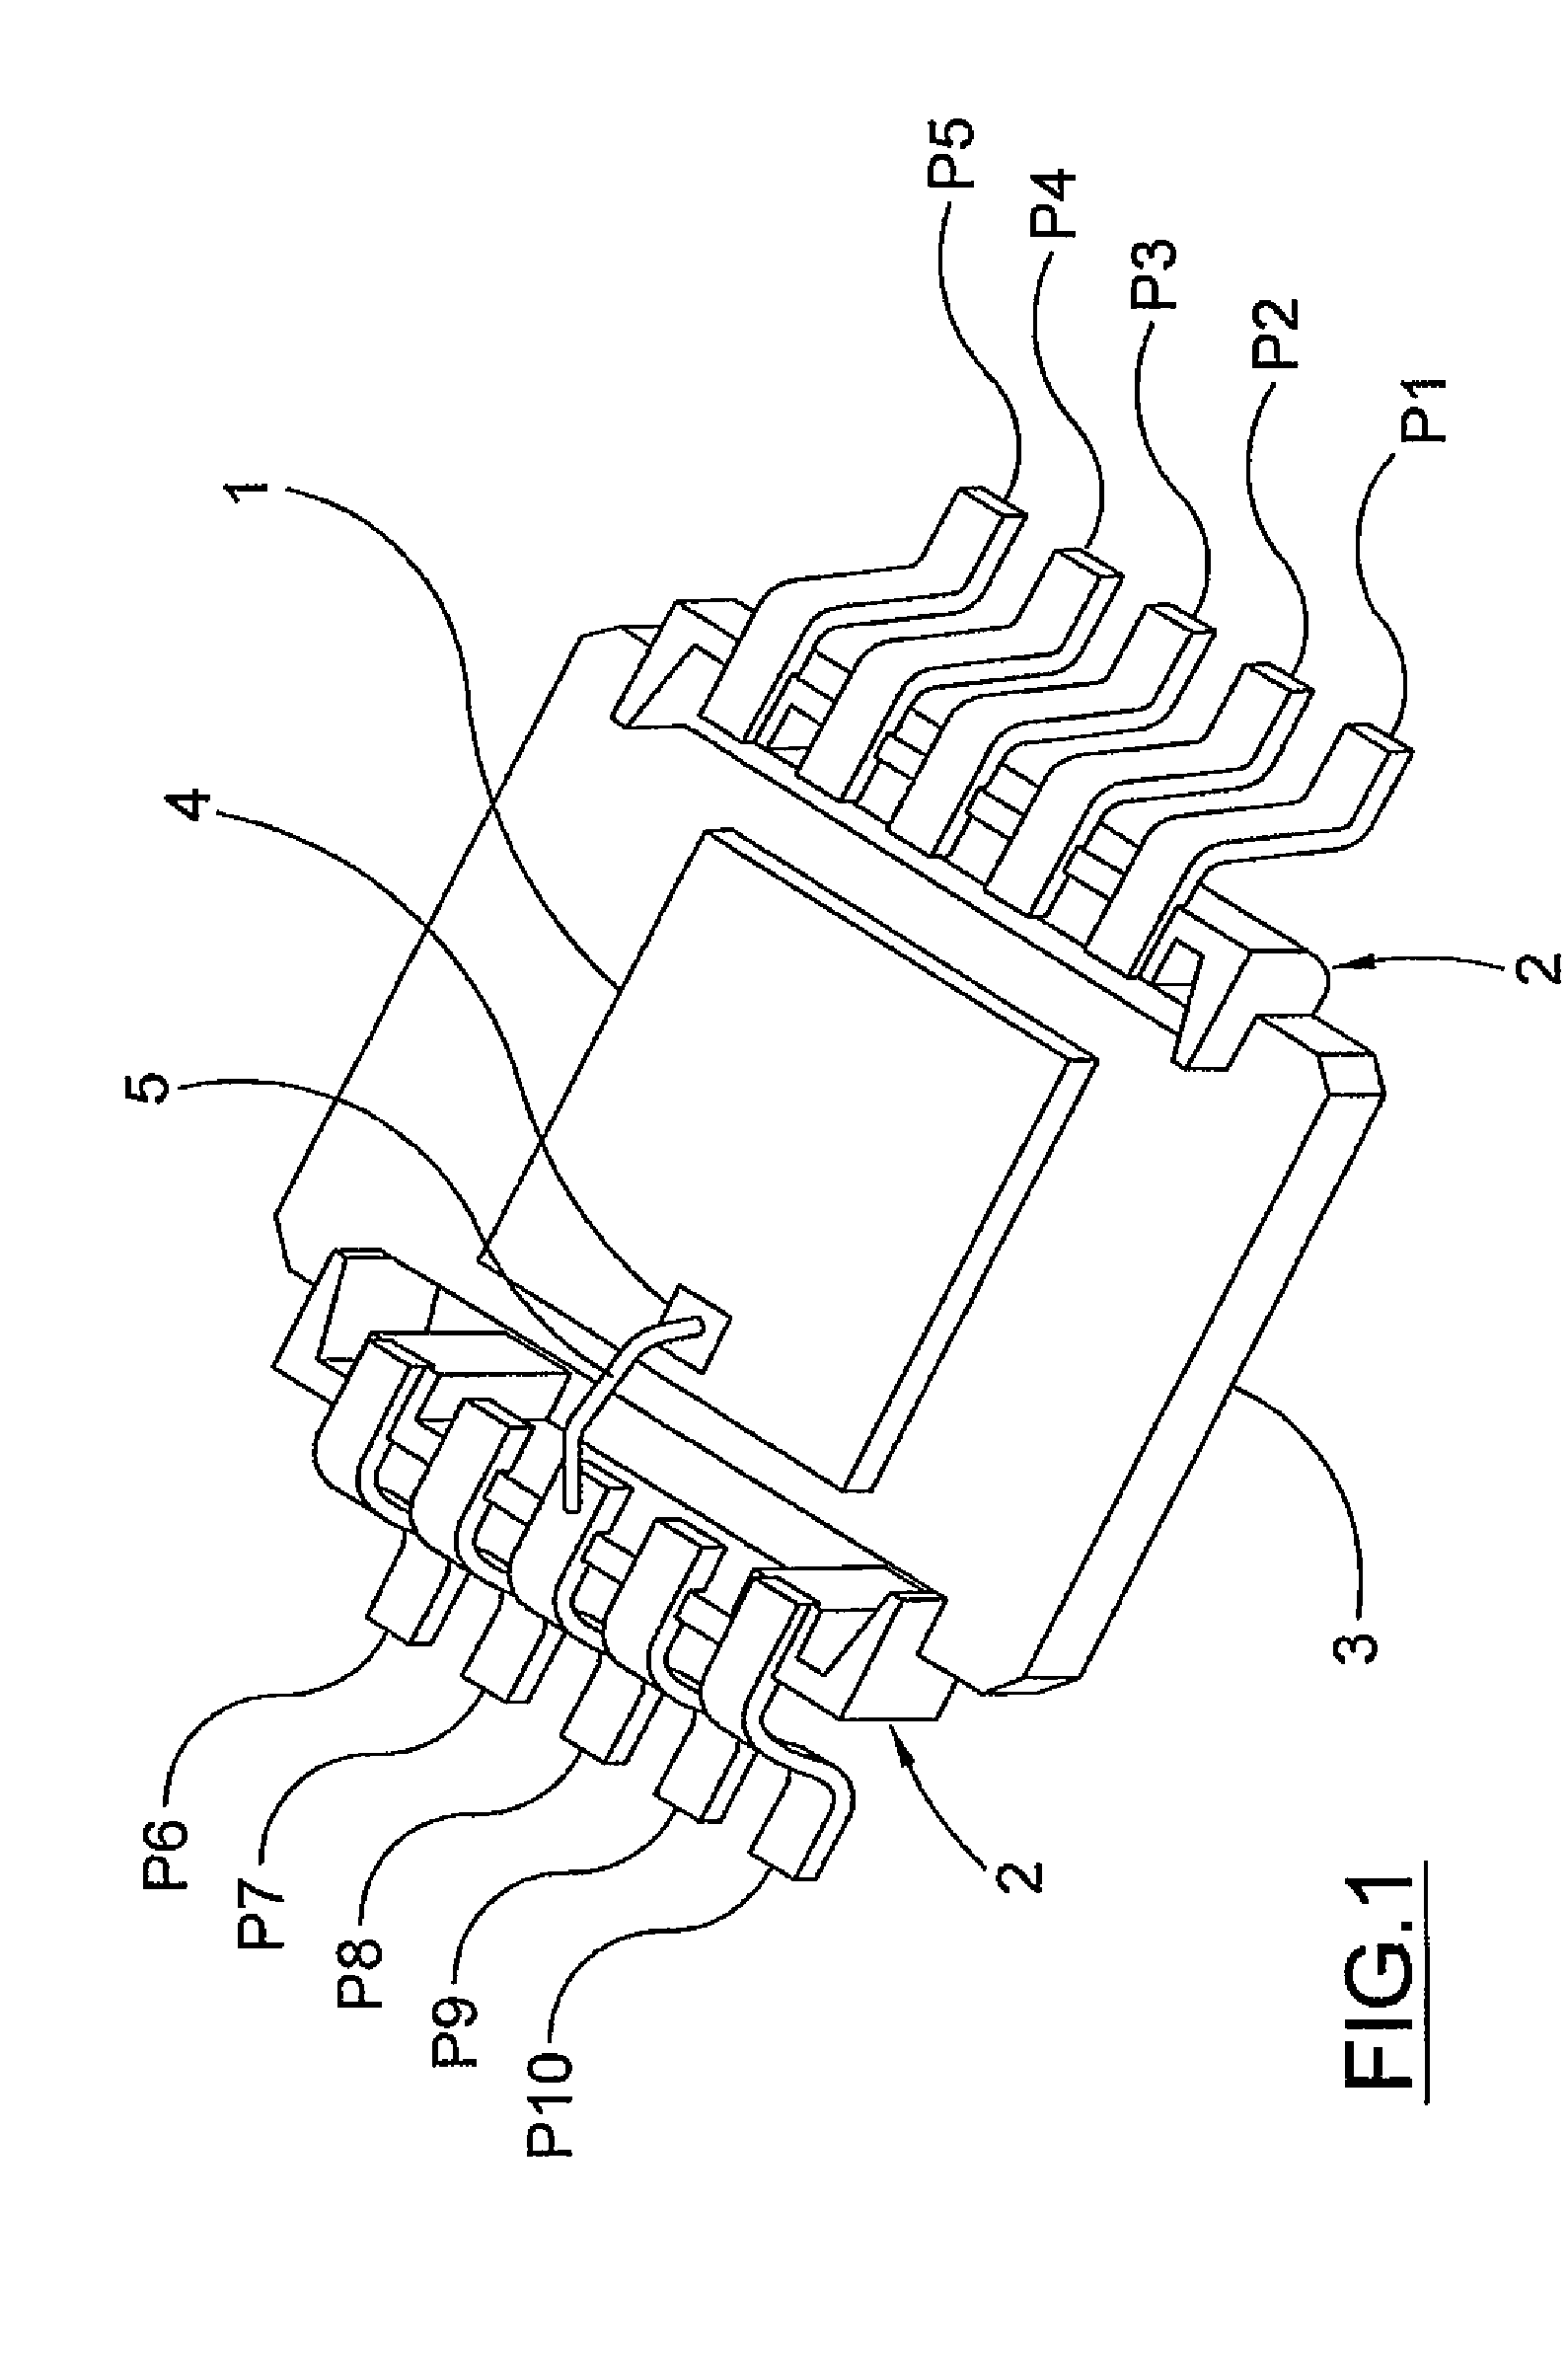 Power integrated circuit with high insensitivity to parasitic inductances of wires for connection to a package and package for said integrated circuit